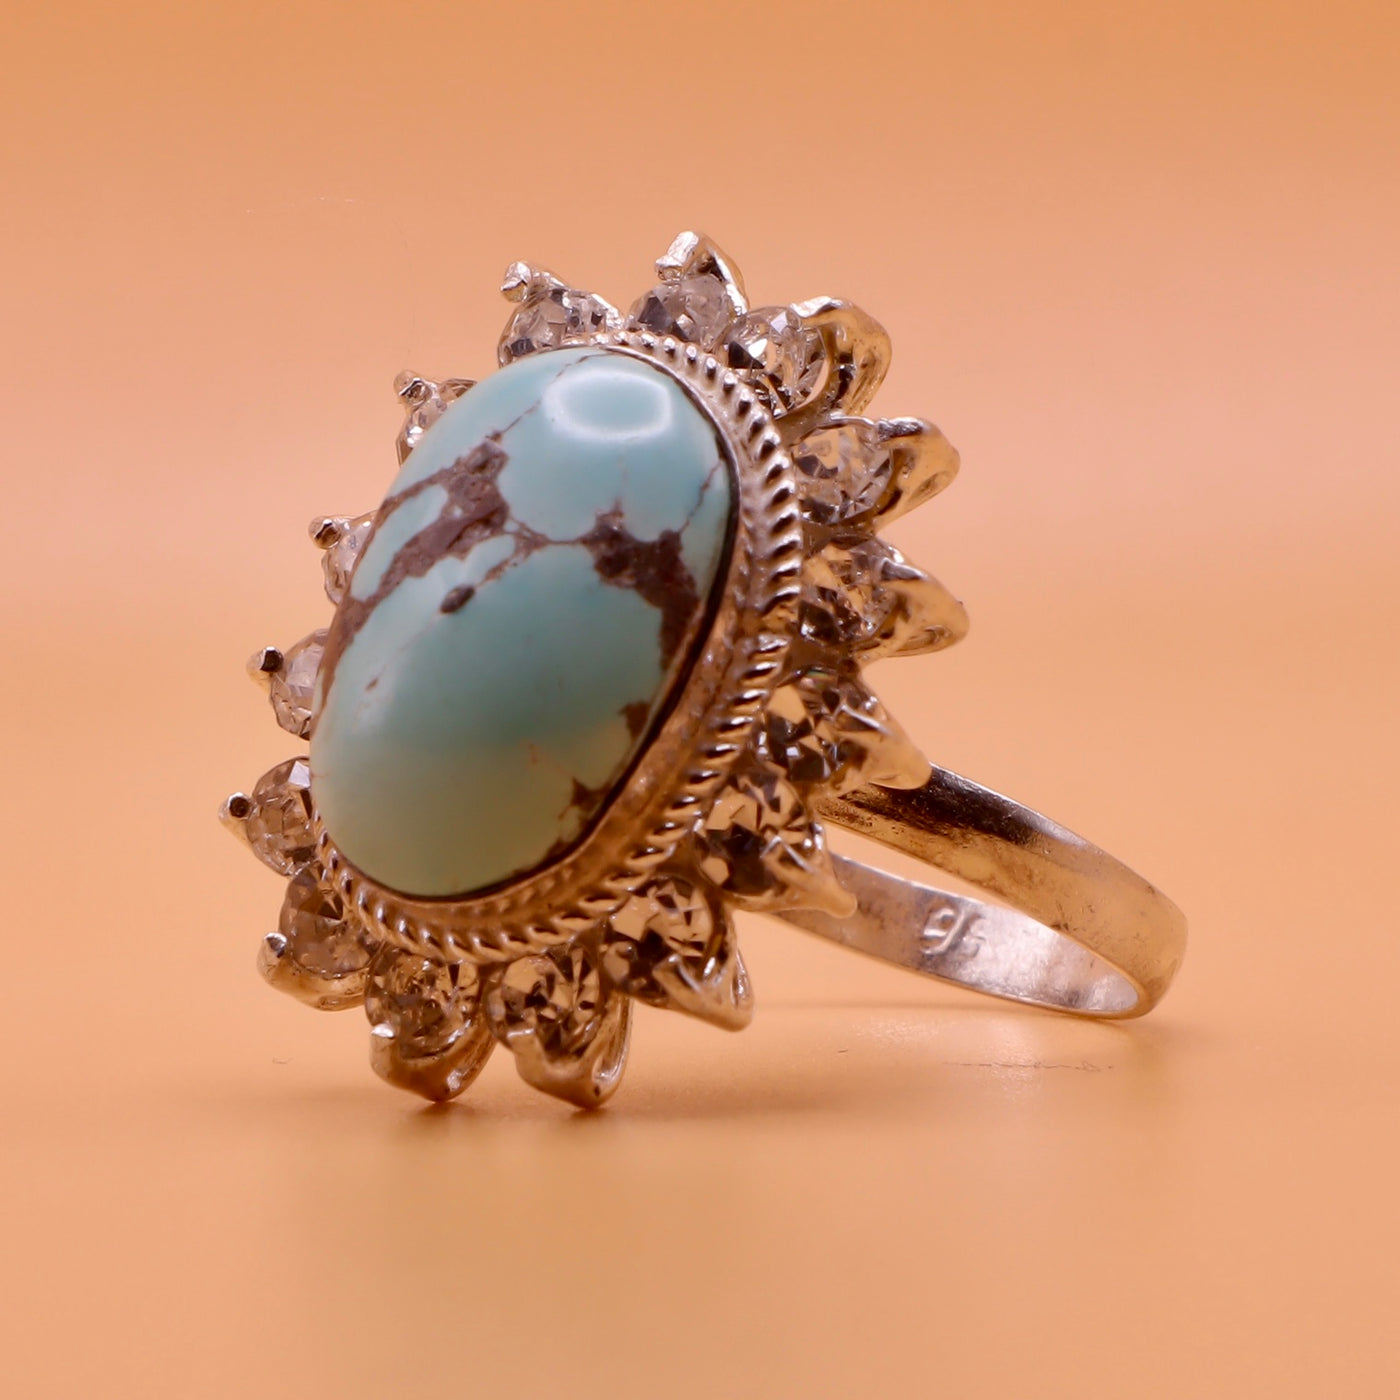 Nishapuri Feroza Ring for Ladies | Genuine Persian Turquoise Sterling Silver Ring with Cubic Zirconia for Women US Size 9 - AlAliGems